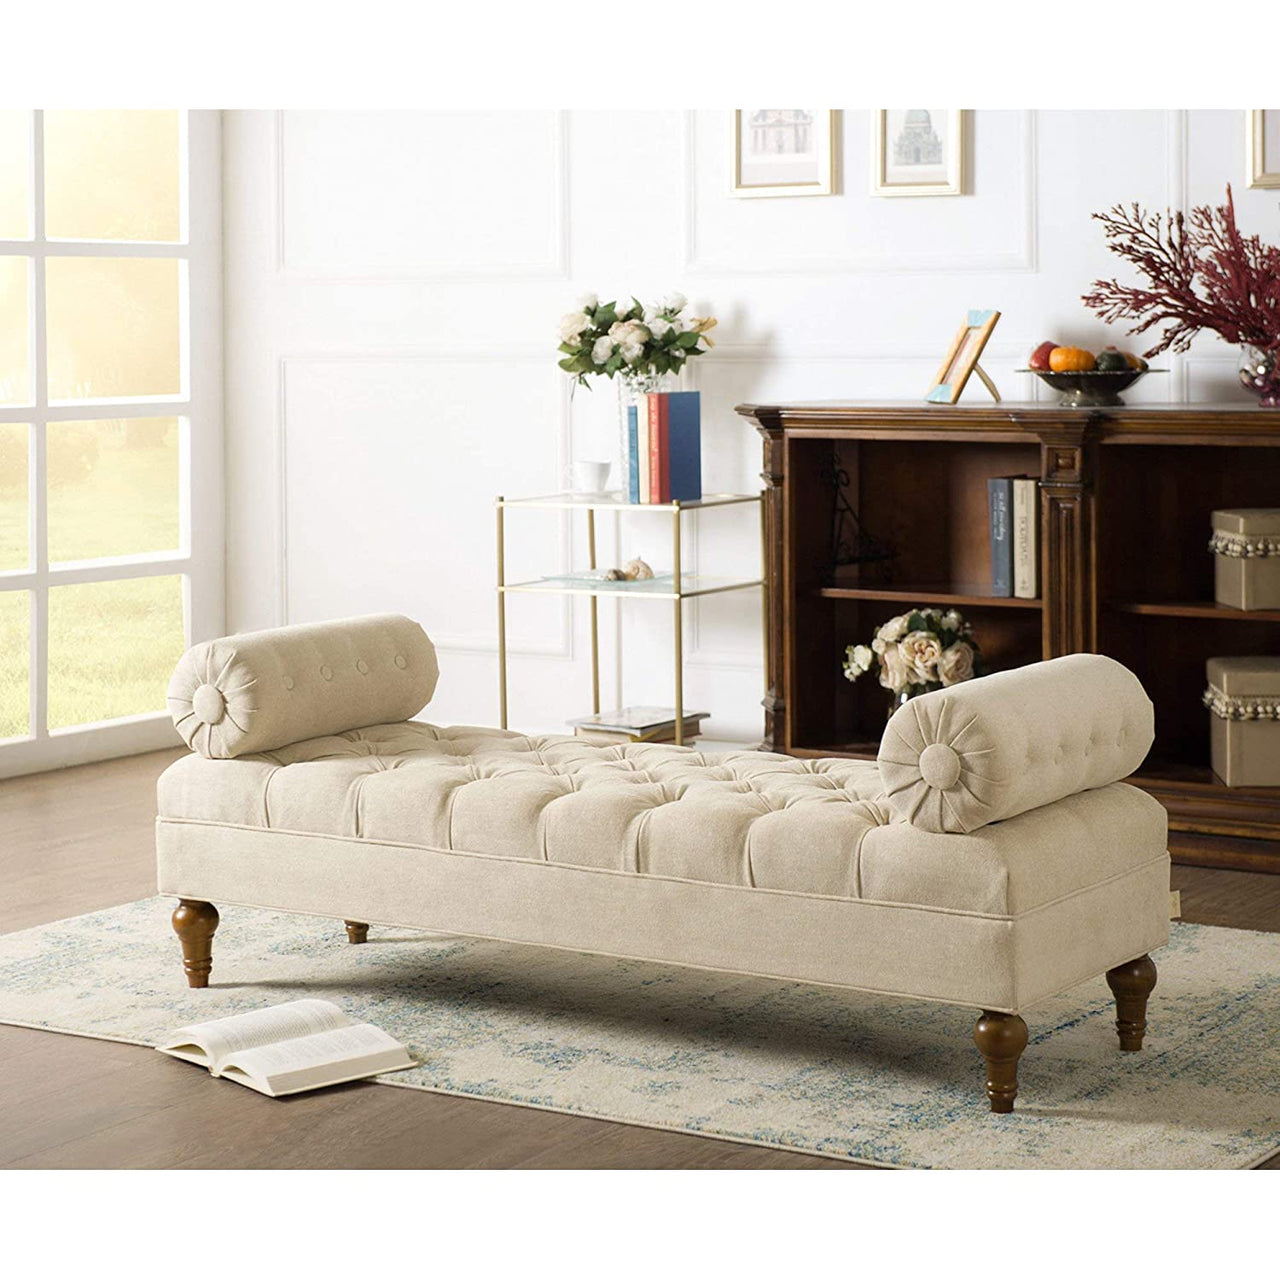 Wooden Bolstered Lounge Entryway Bench Three Seater Sofa diwan Couch Lounger Lounge diwan Settee for Living Room Sofa Set Dime Store